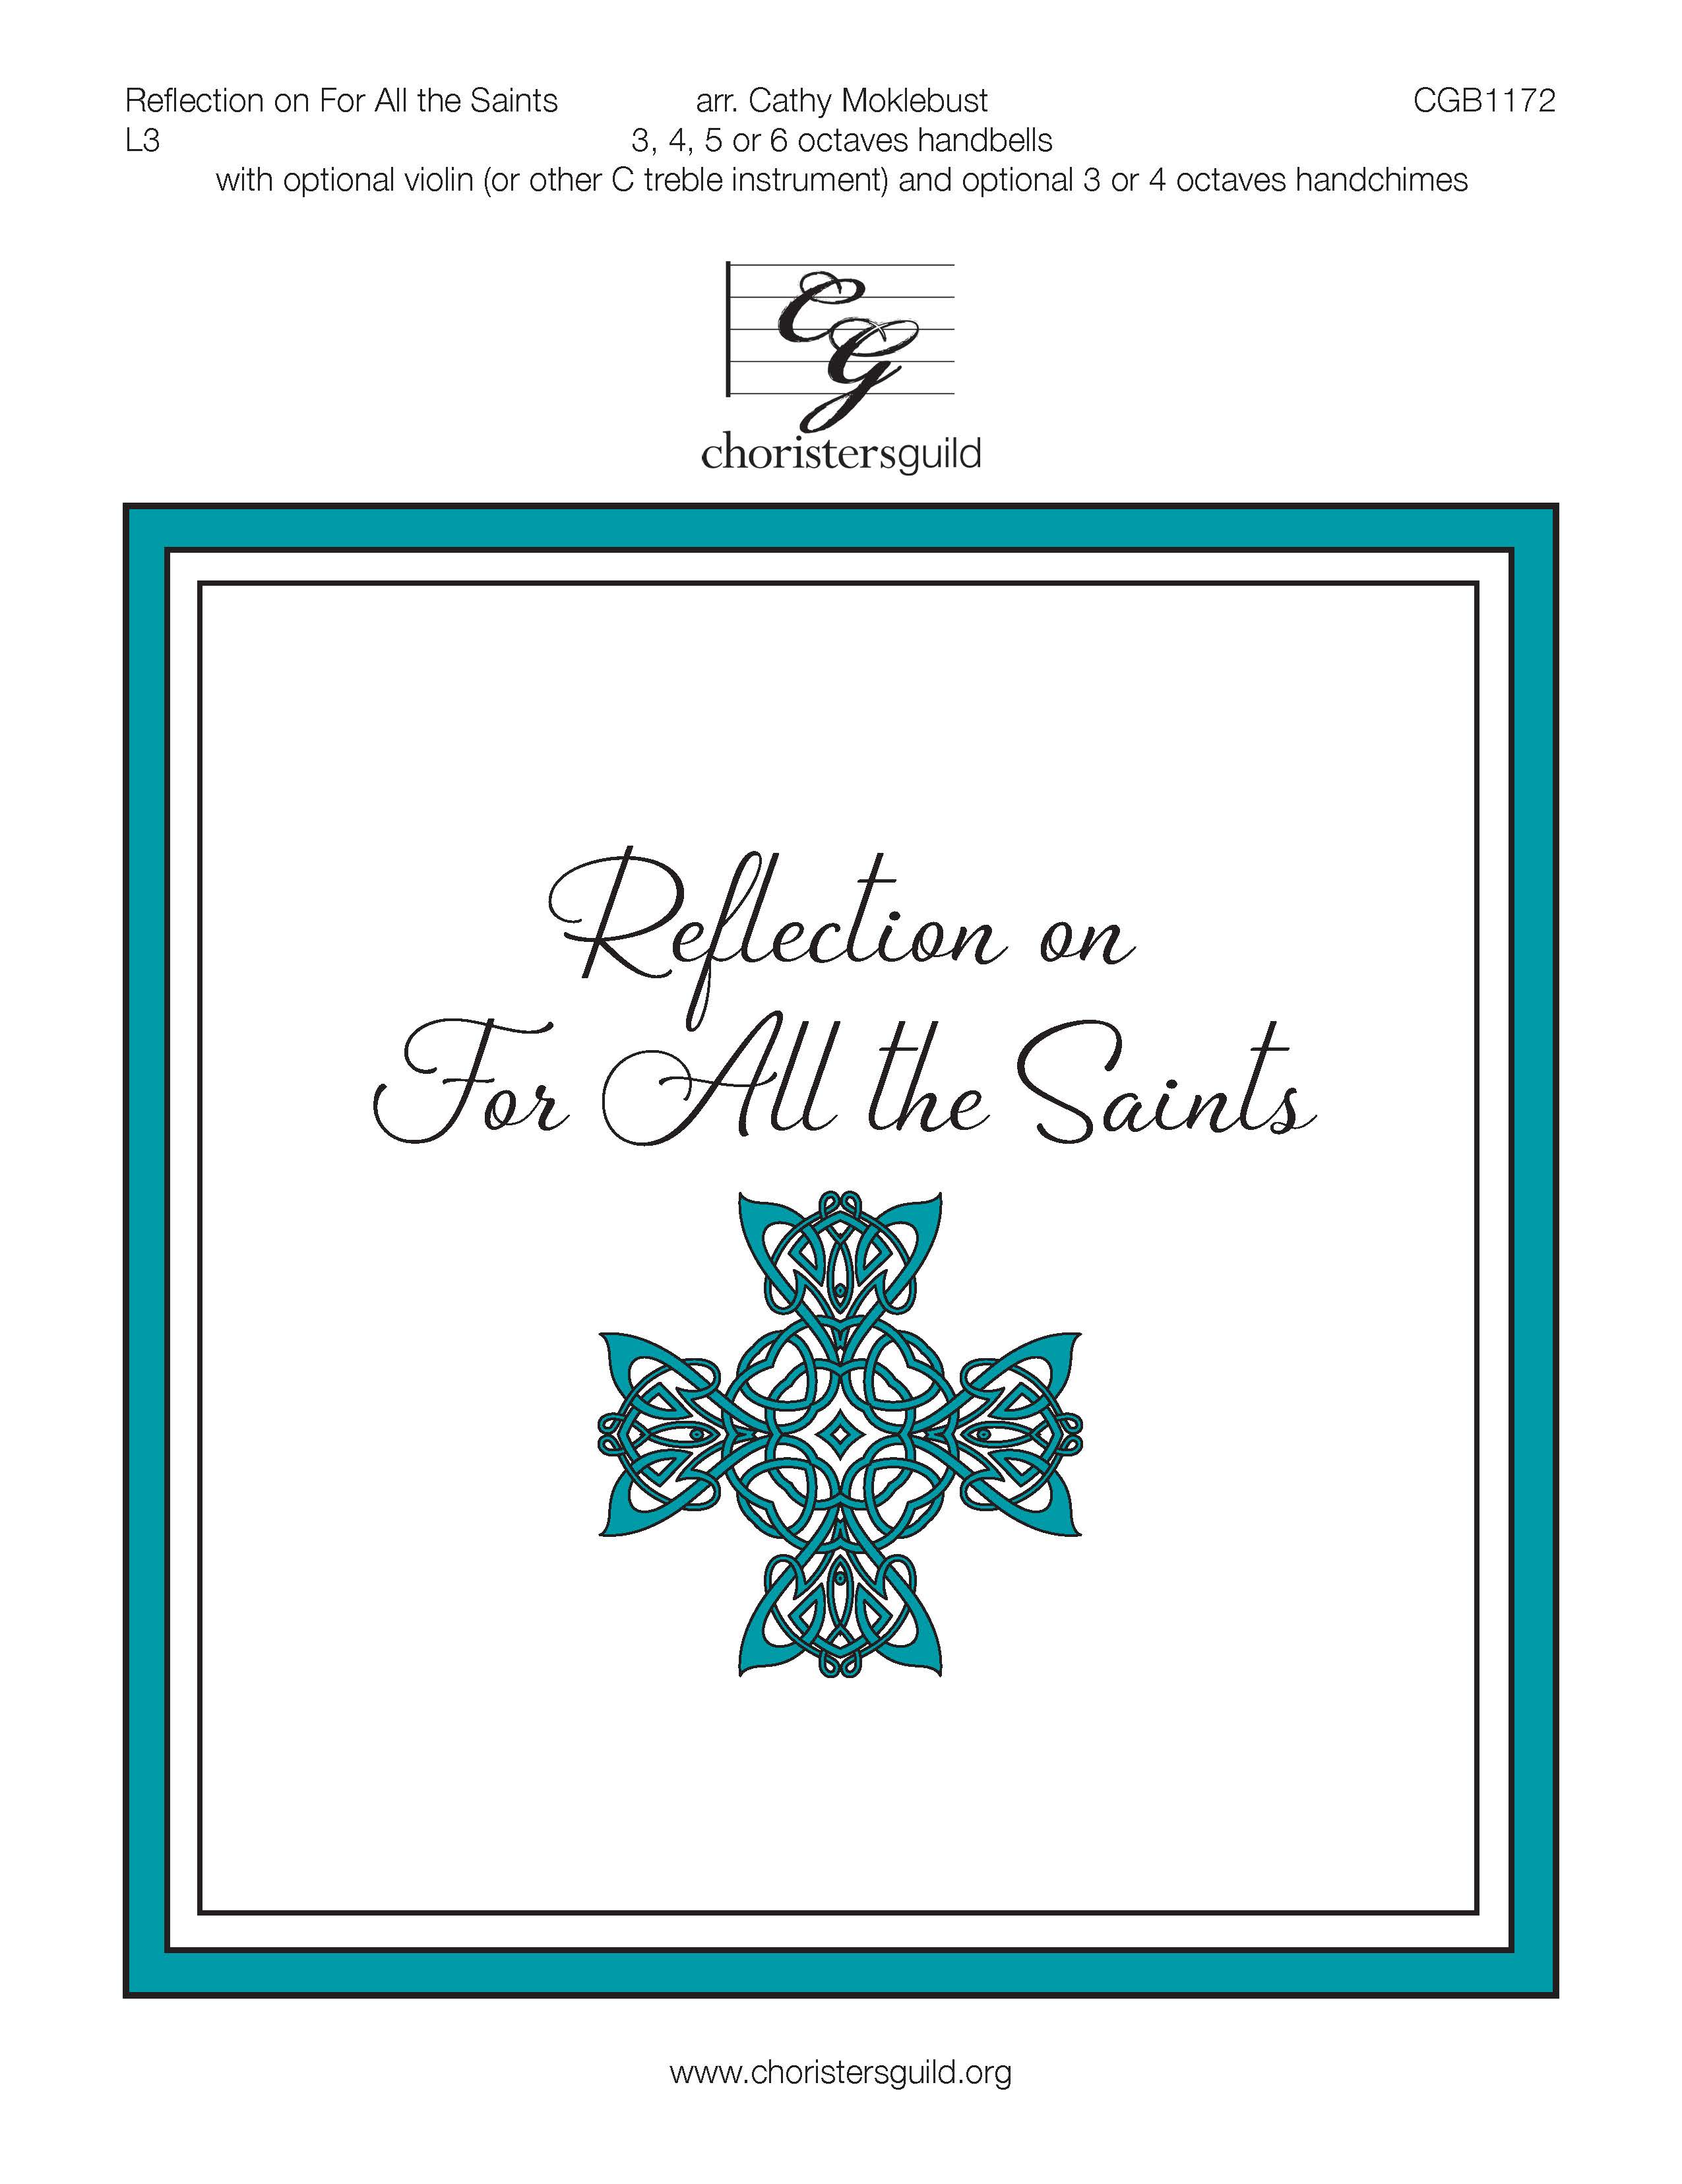 Reflection on For All the Saints - 3-6 octaves